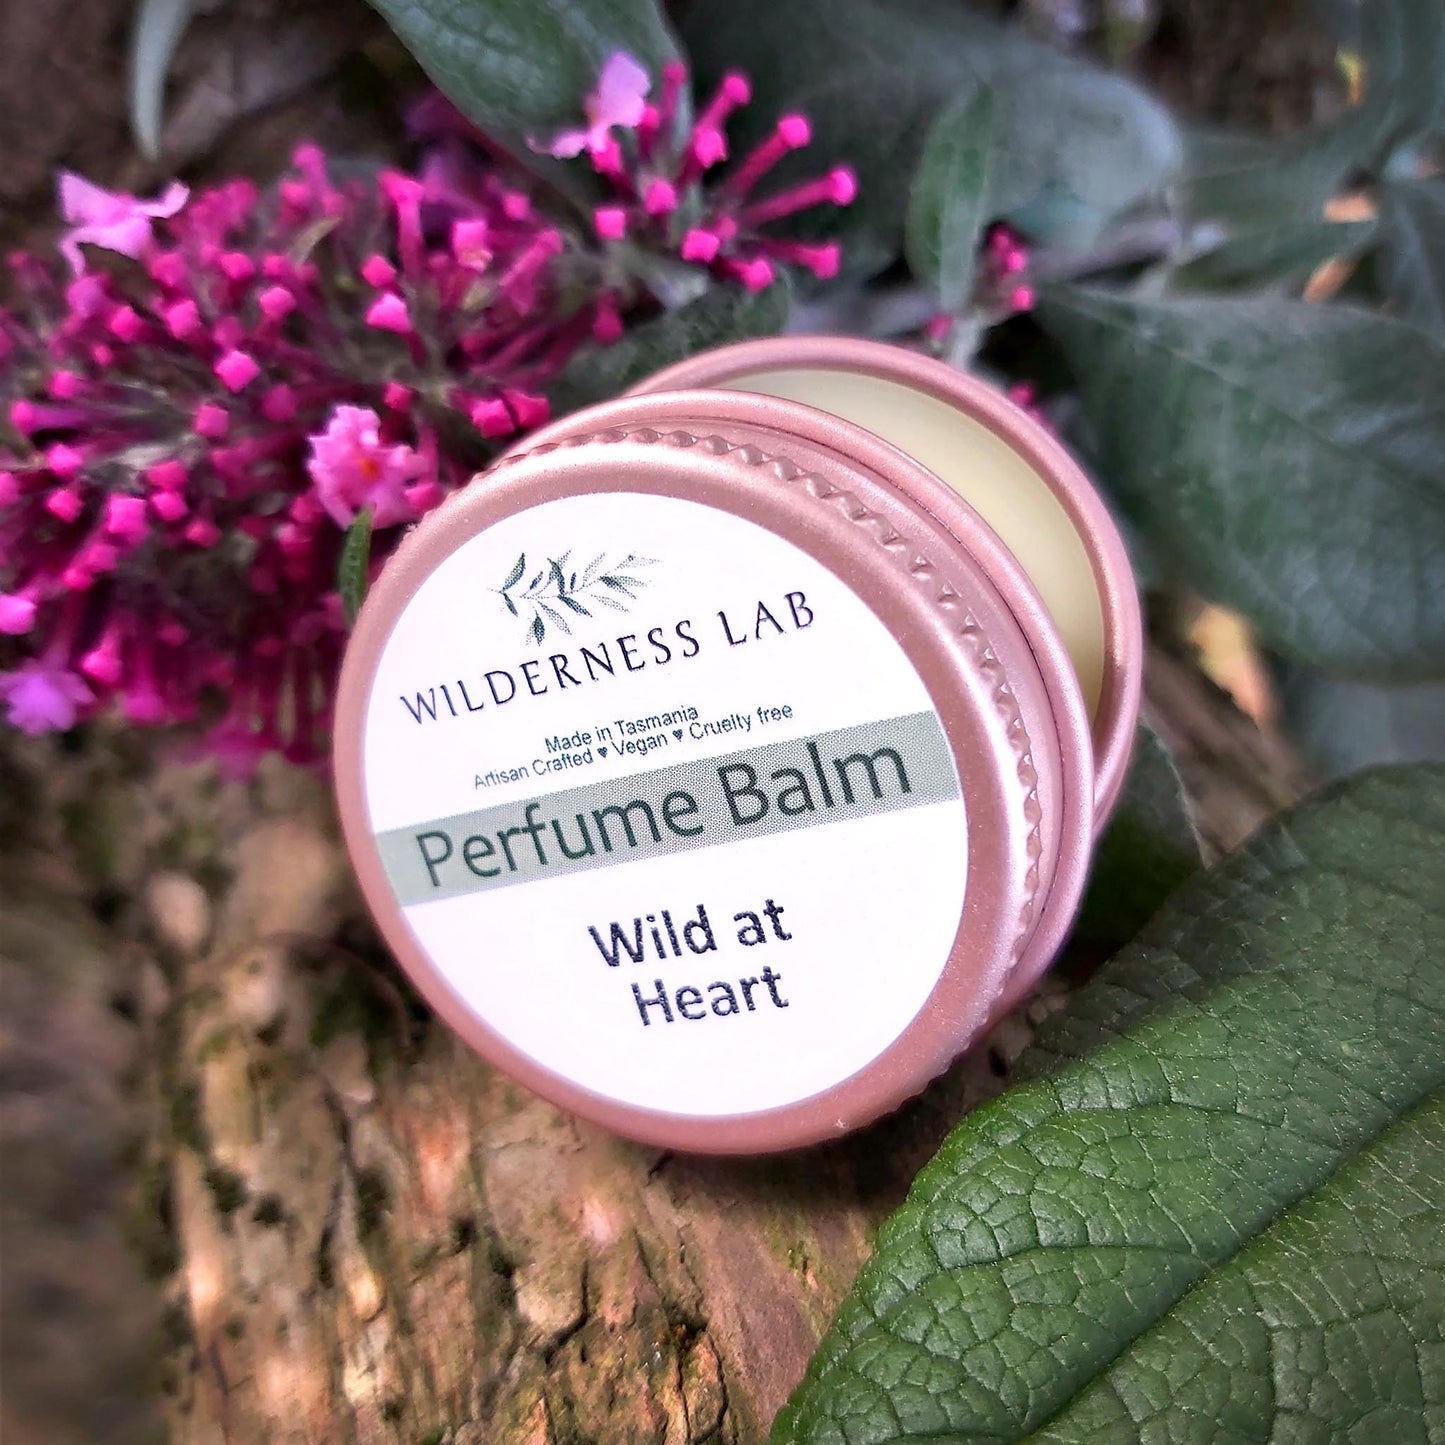 Wild at Heart Solid Perfume - natural vegan perfume balm with essential oils